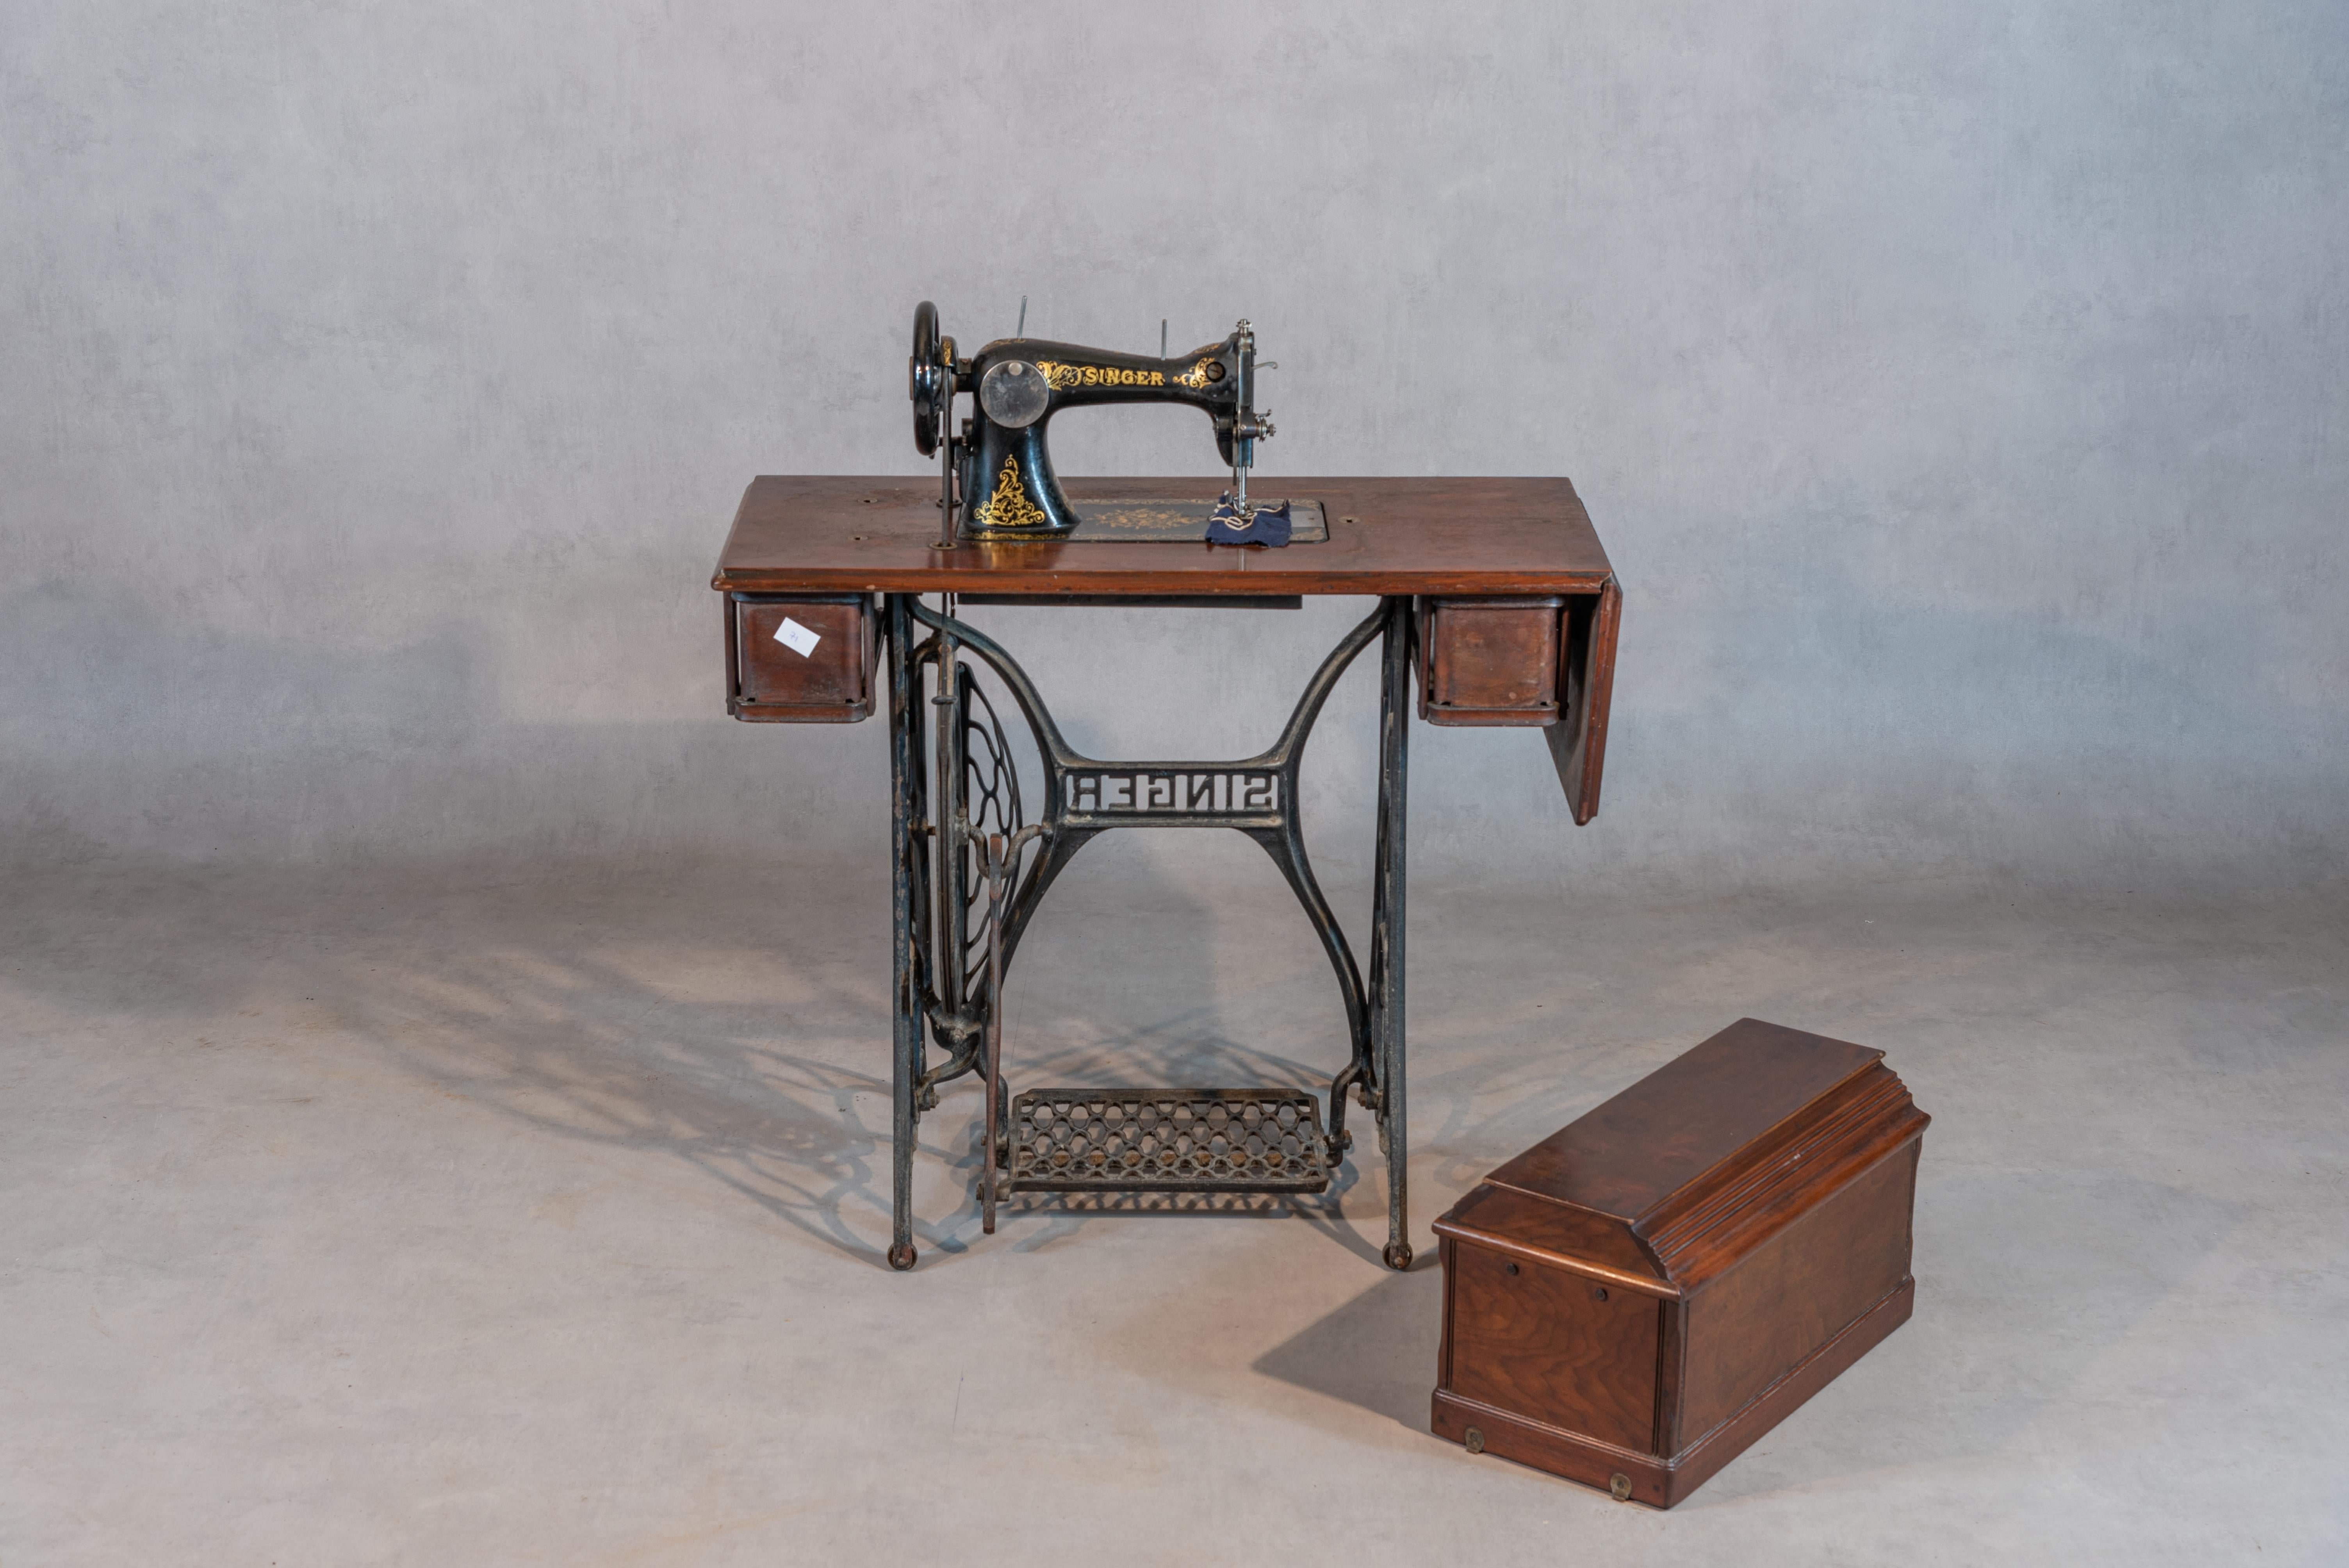 Experience the nostalgia and charm of this Antique Singer sewing machine from the early 20th century, in great working condition and ready to bring a touch of vintage elegance to any home. Crafted from solid walnut, this Singer Sewing Machine boasts